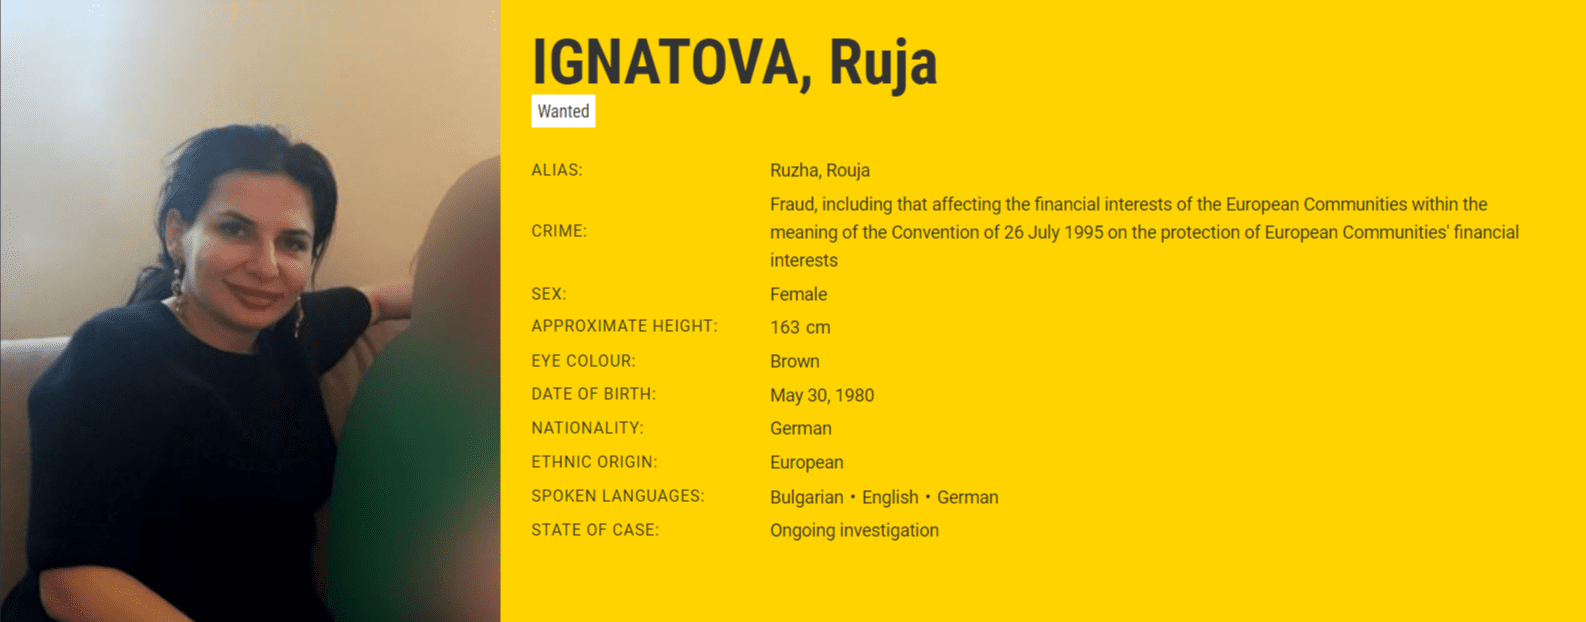 Ruja Ignatova is now on the Most Wanted list of the Europol. Image: Europol